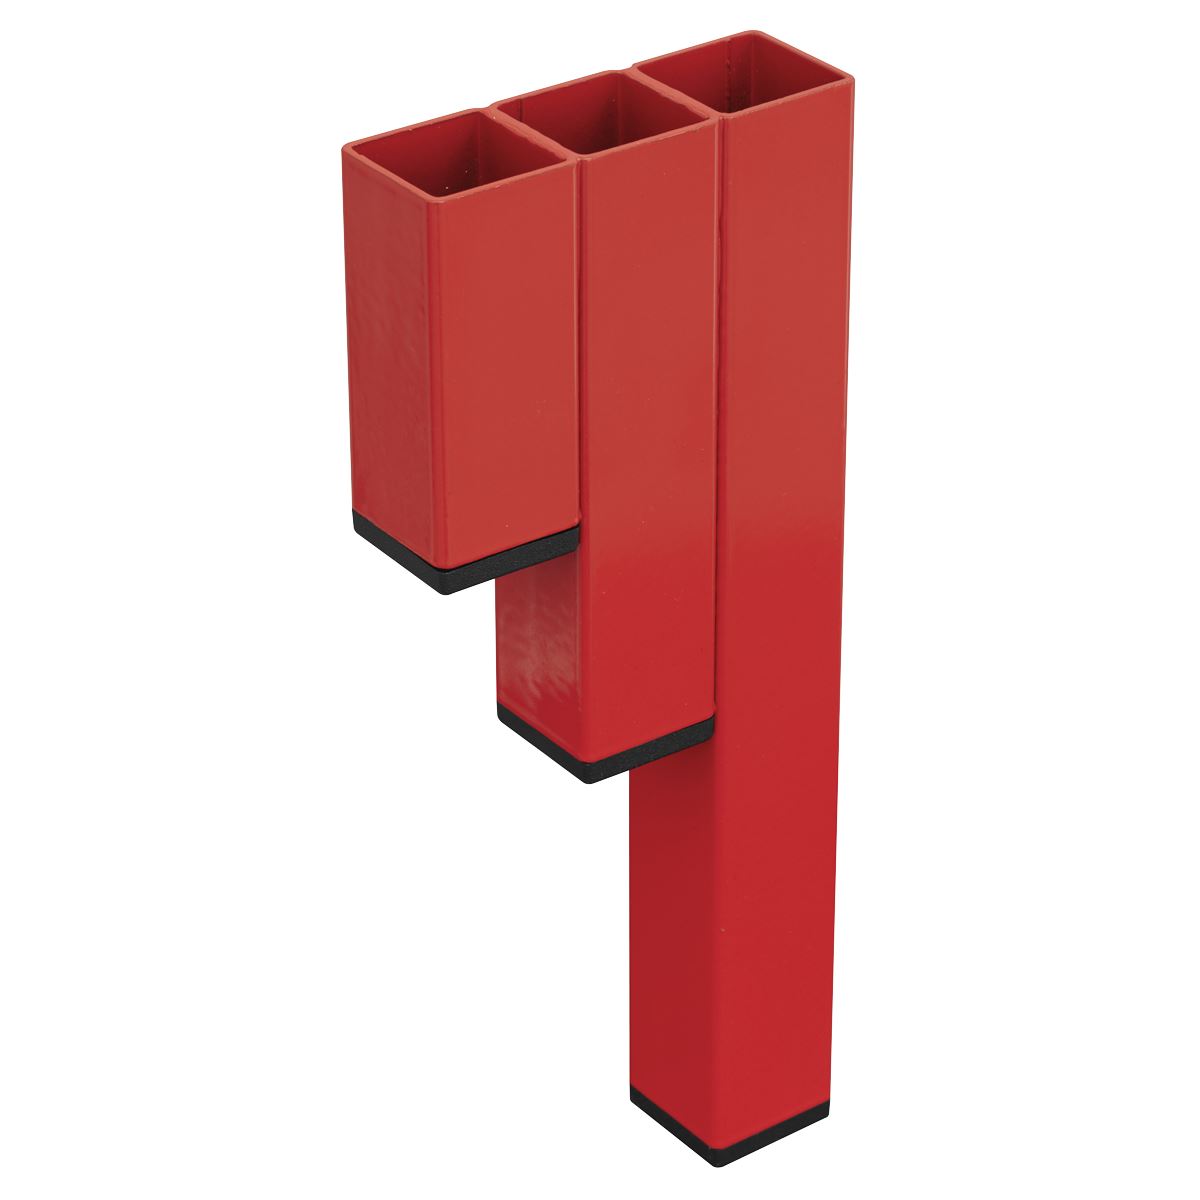 Sealey Magnetic Cable Tie Holder - Red